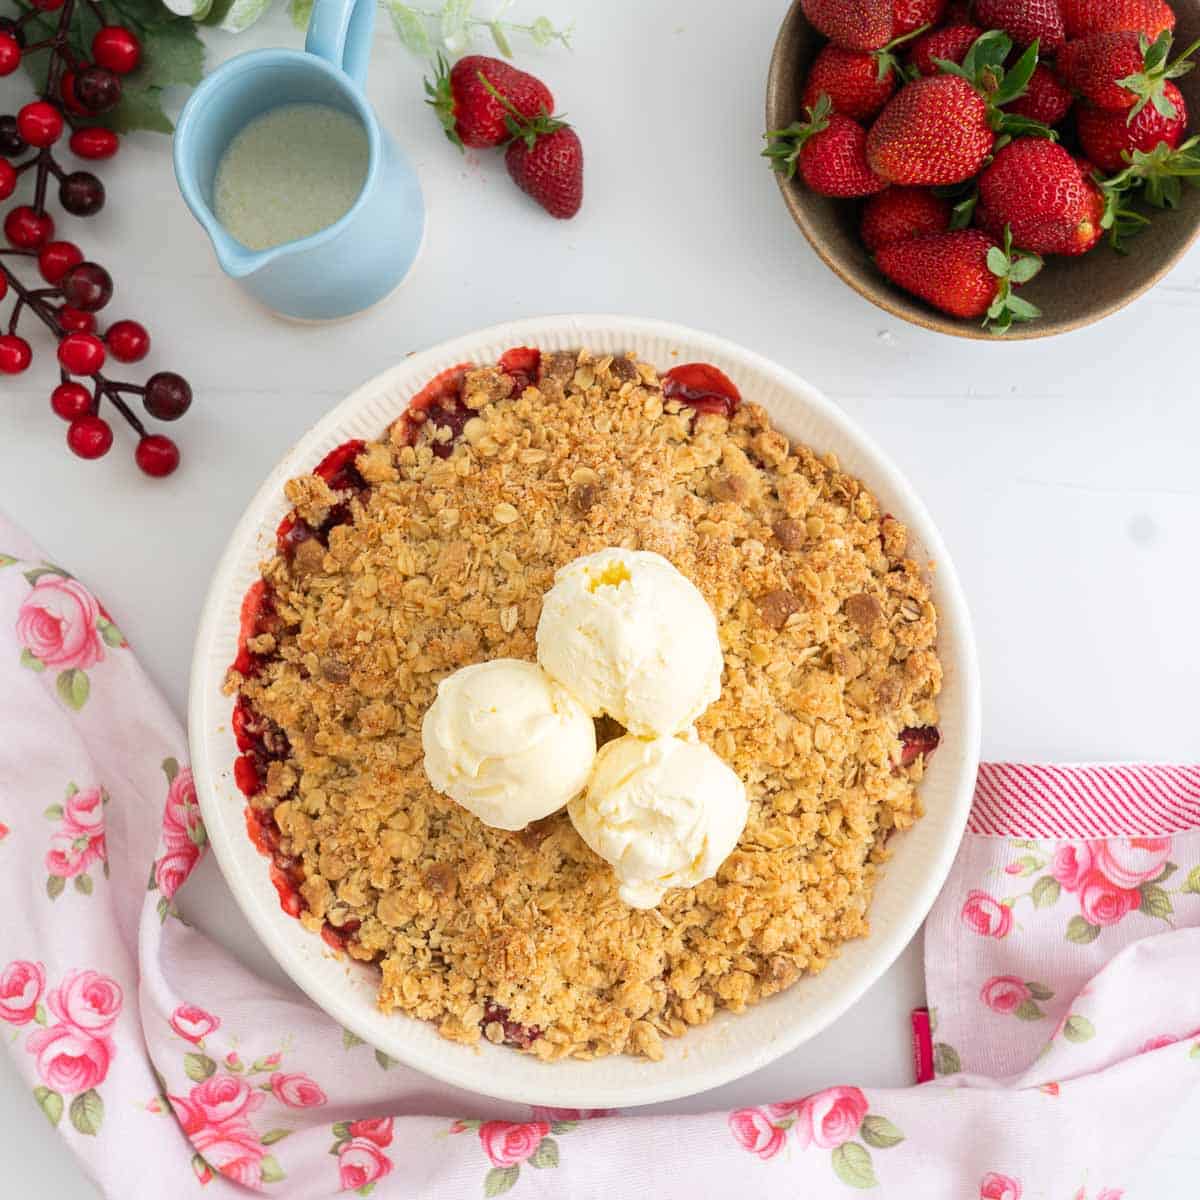 A fruit crumble topped with three scoops of ice cream on a white counter top with strawberries and a pink floral tea towel.